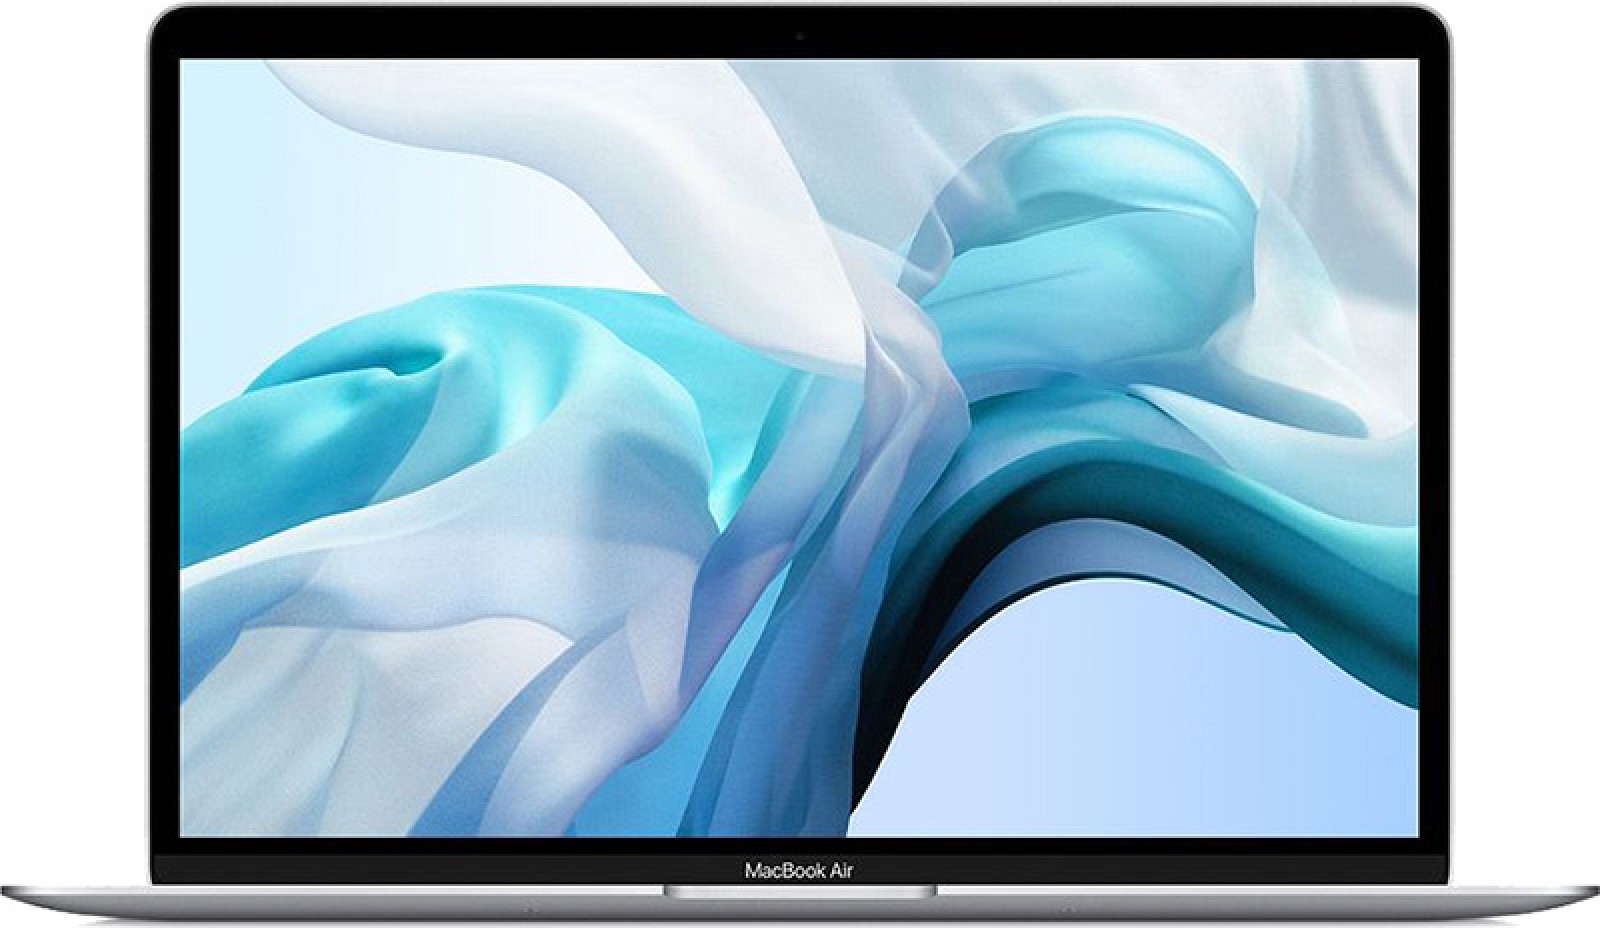 2018 MacBook Air Available for $999 at Select Apple Stores While Quantities Last, $849 Refurbished